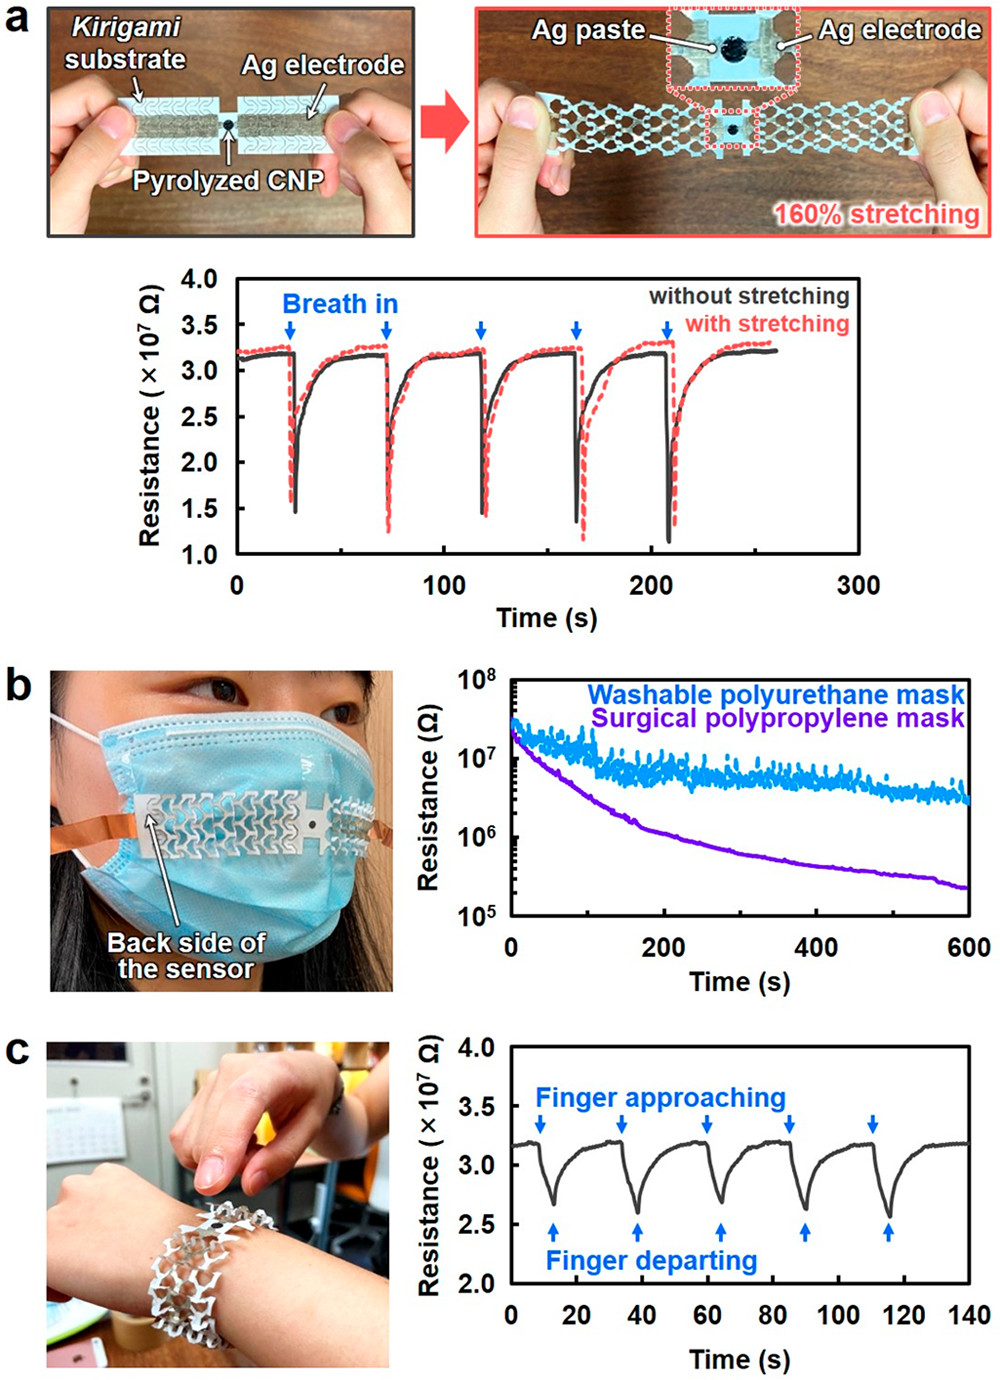 Stretchable and wearable sensor devices based on the pyrolyzed cellulose nanofiber paper (CNP) sensor and kirigami paper substrate. (a) Optical images of the sensor device and water vapor sensing in exhaled human breath before and after stretching, demonstrating the (b) monitoring of human exhalation-derived water vapor leaked from the face masks and (c) detection of skin moisture upon an approaching finger. The finger approaches close to ~5 mm to the pyrolyzed CNP sensor and is held for 5 s, followed by departing away from the sensor.